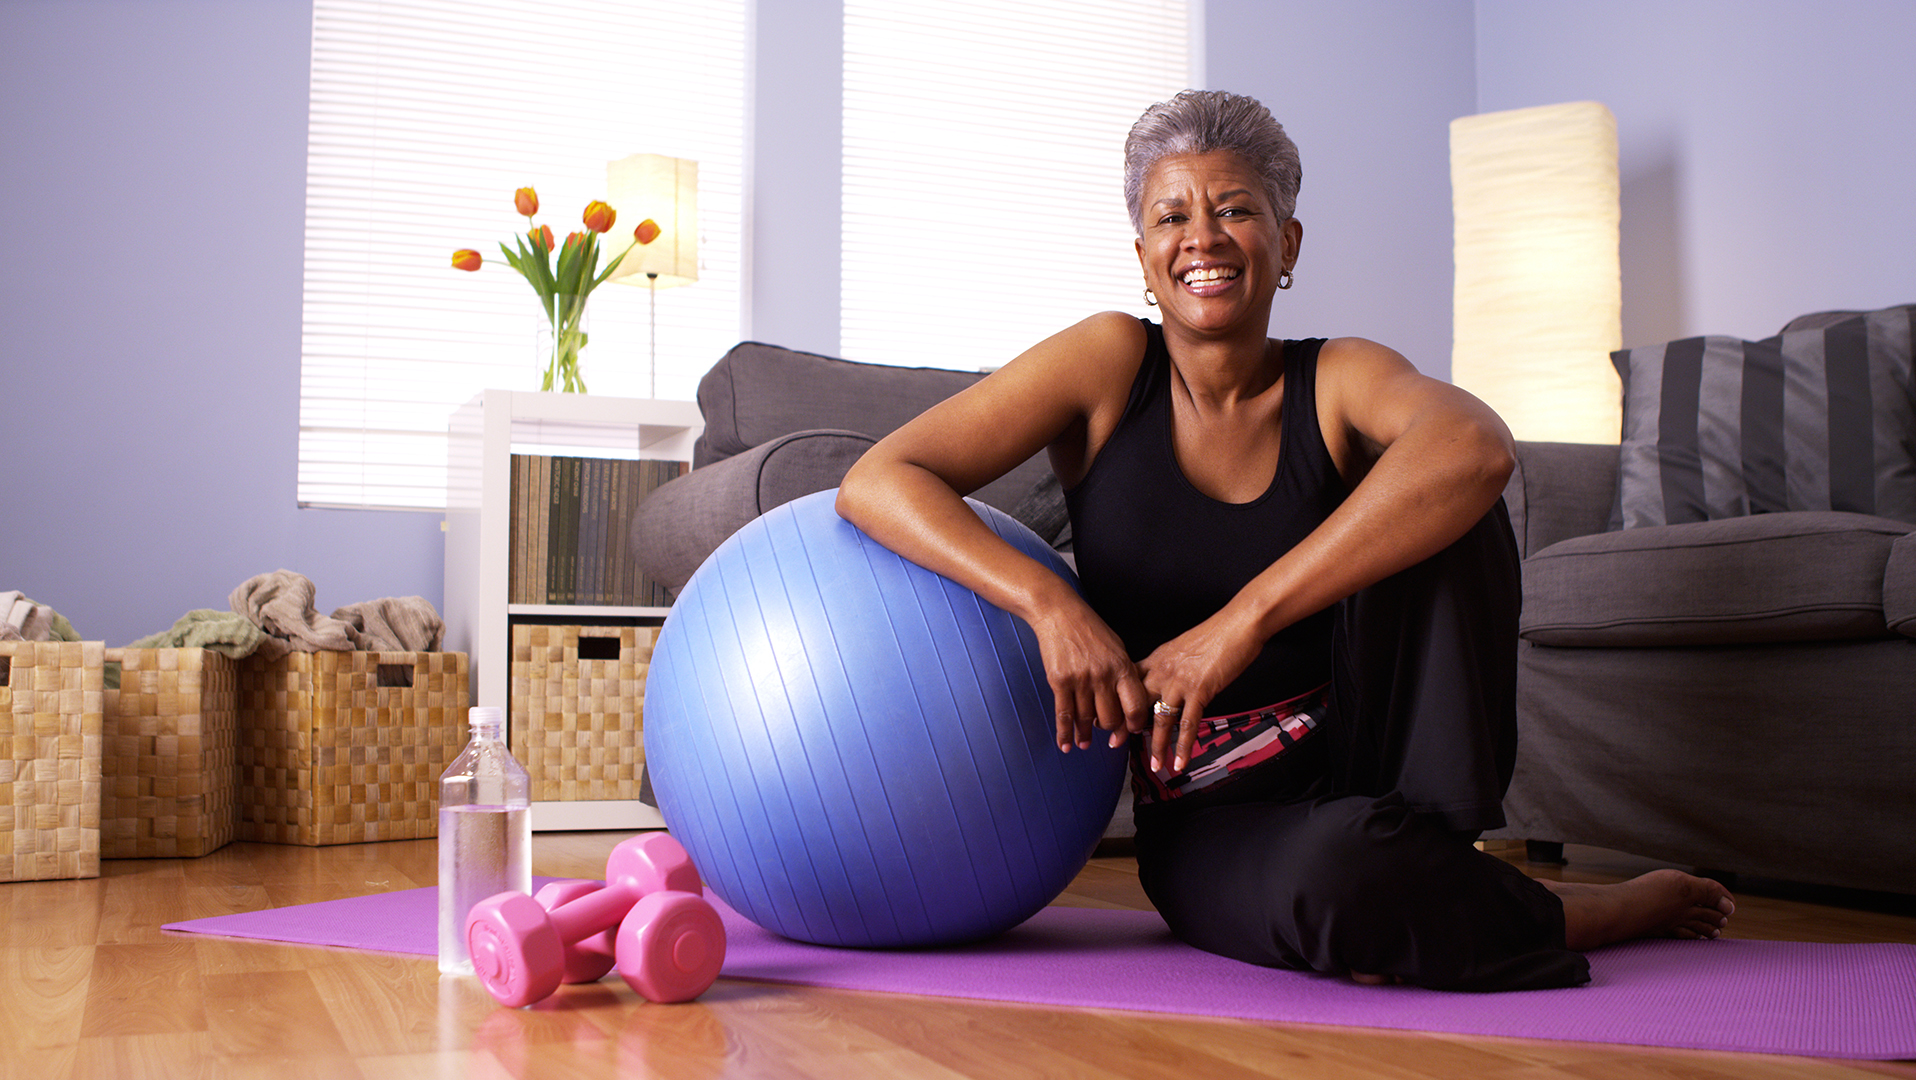 woman smiling sitting next to exercise ball and weights